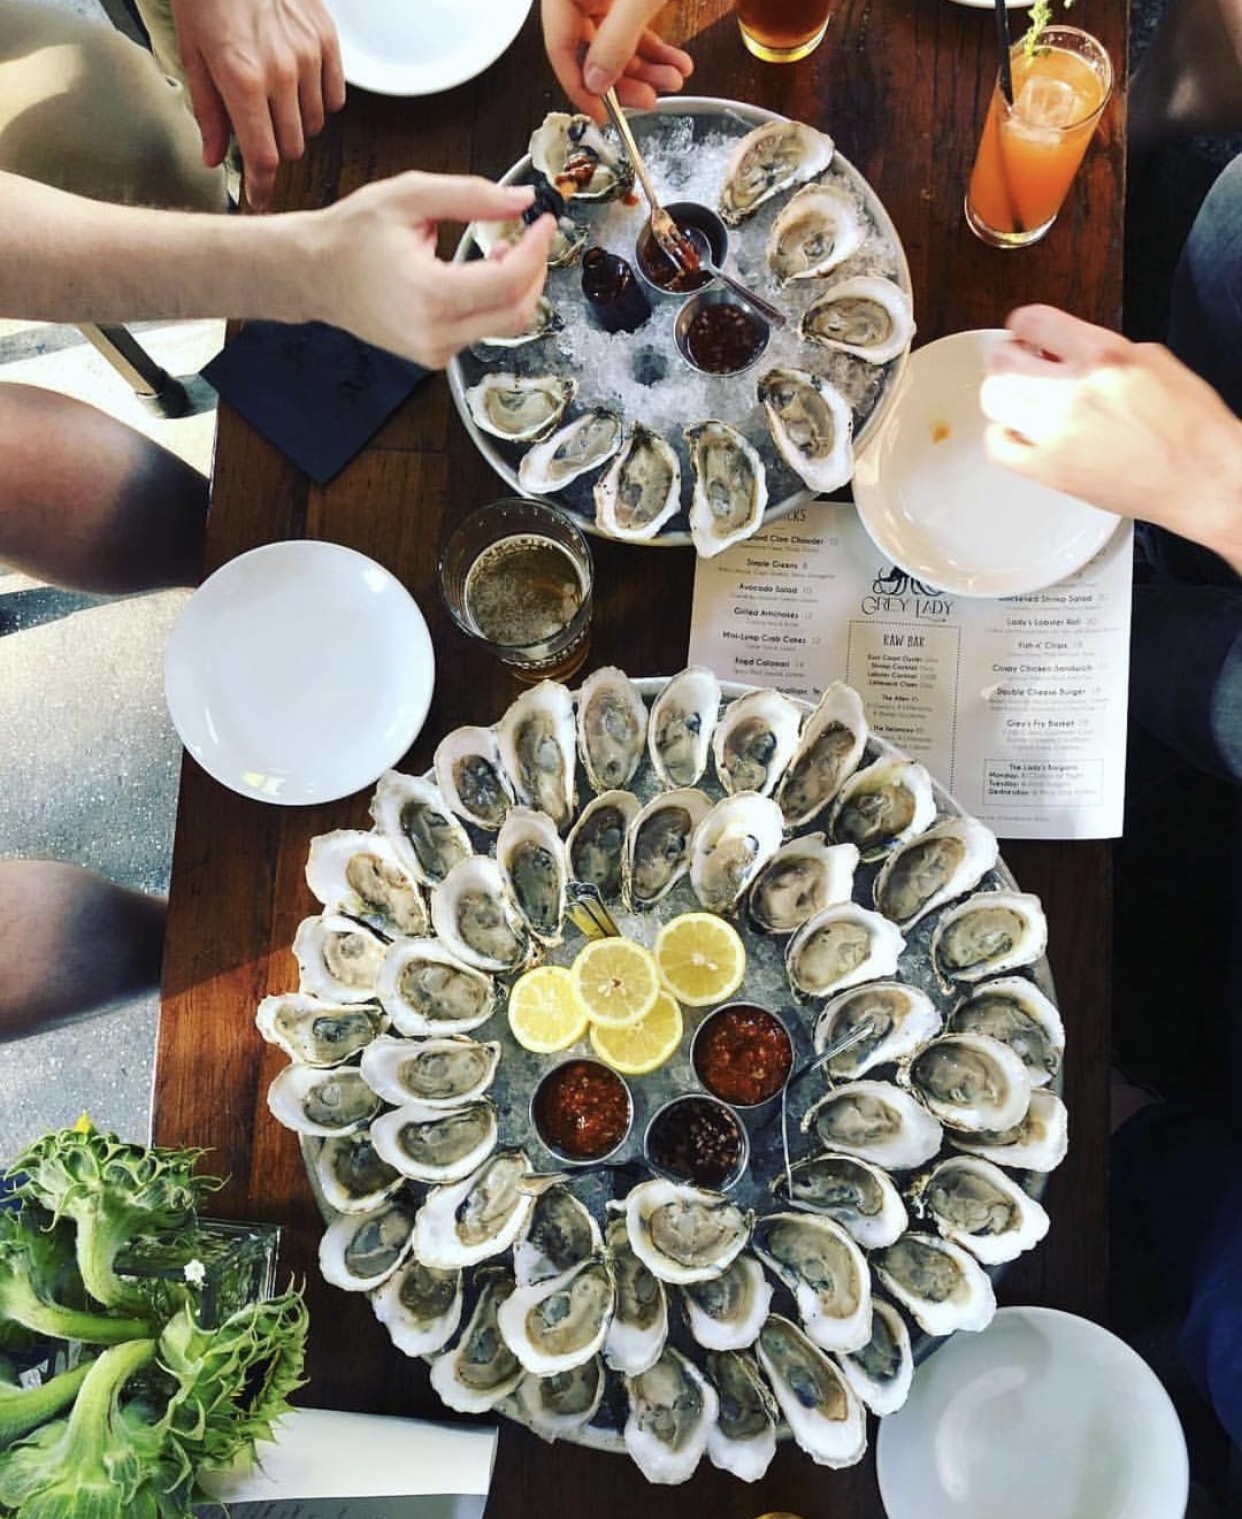 A Party at Grey Lady with oysters